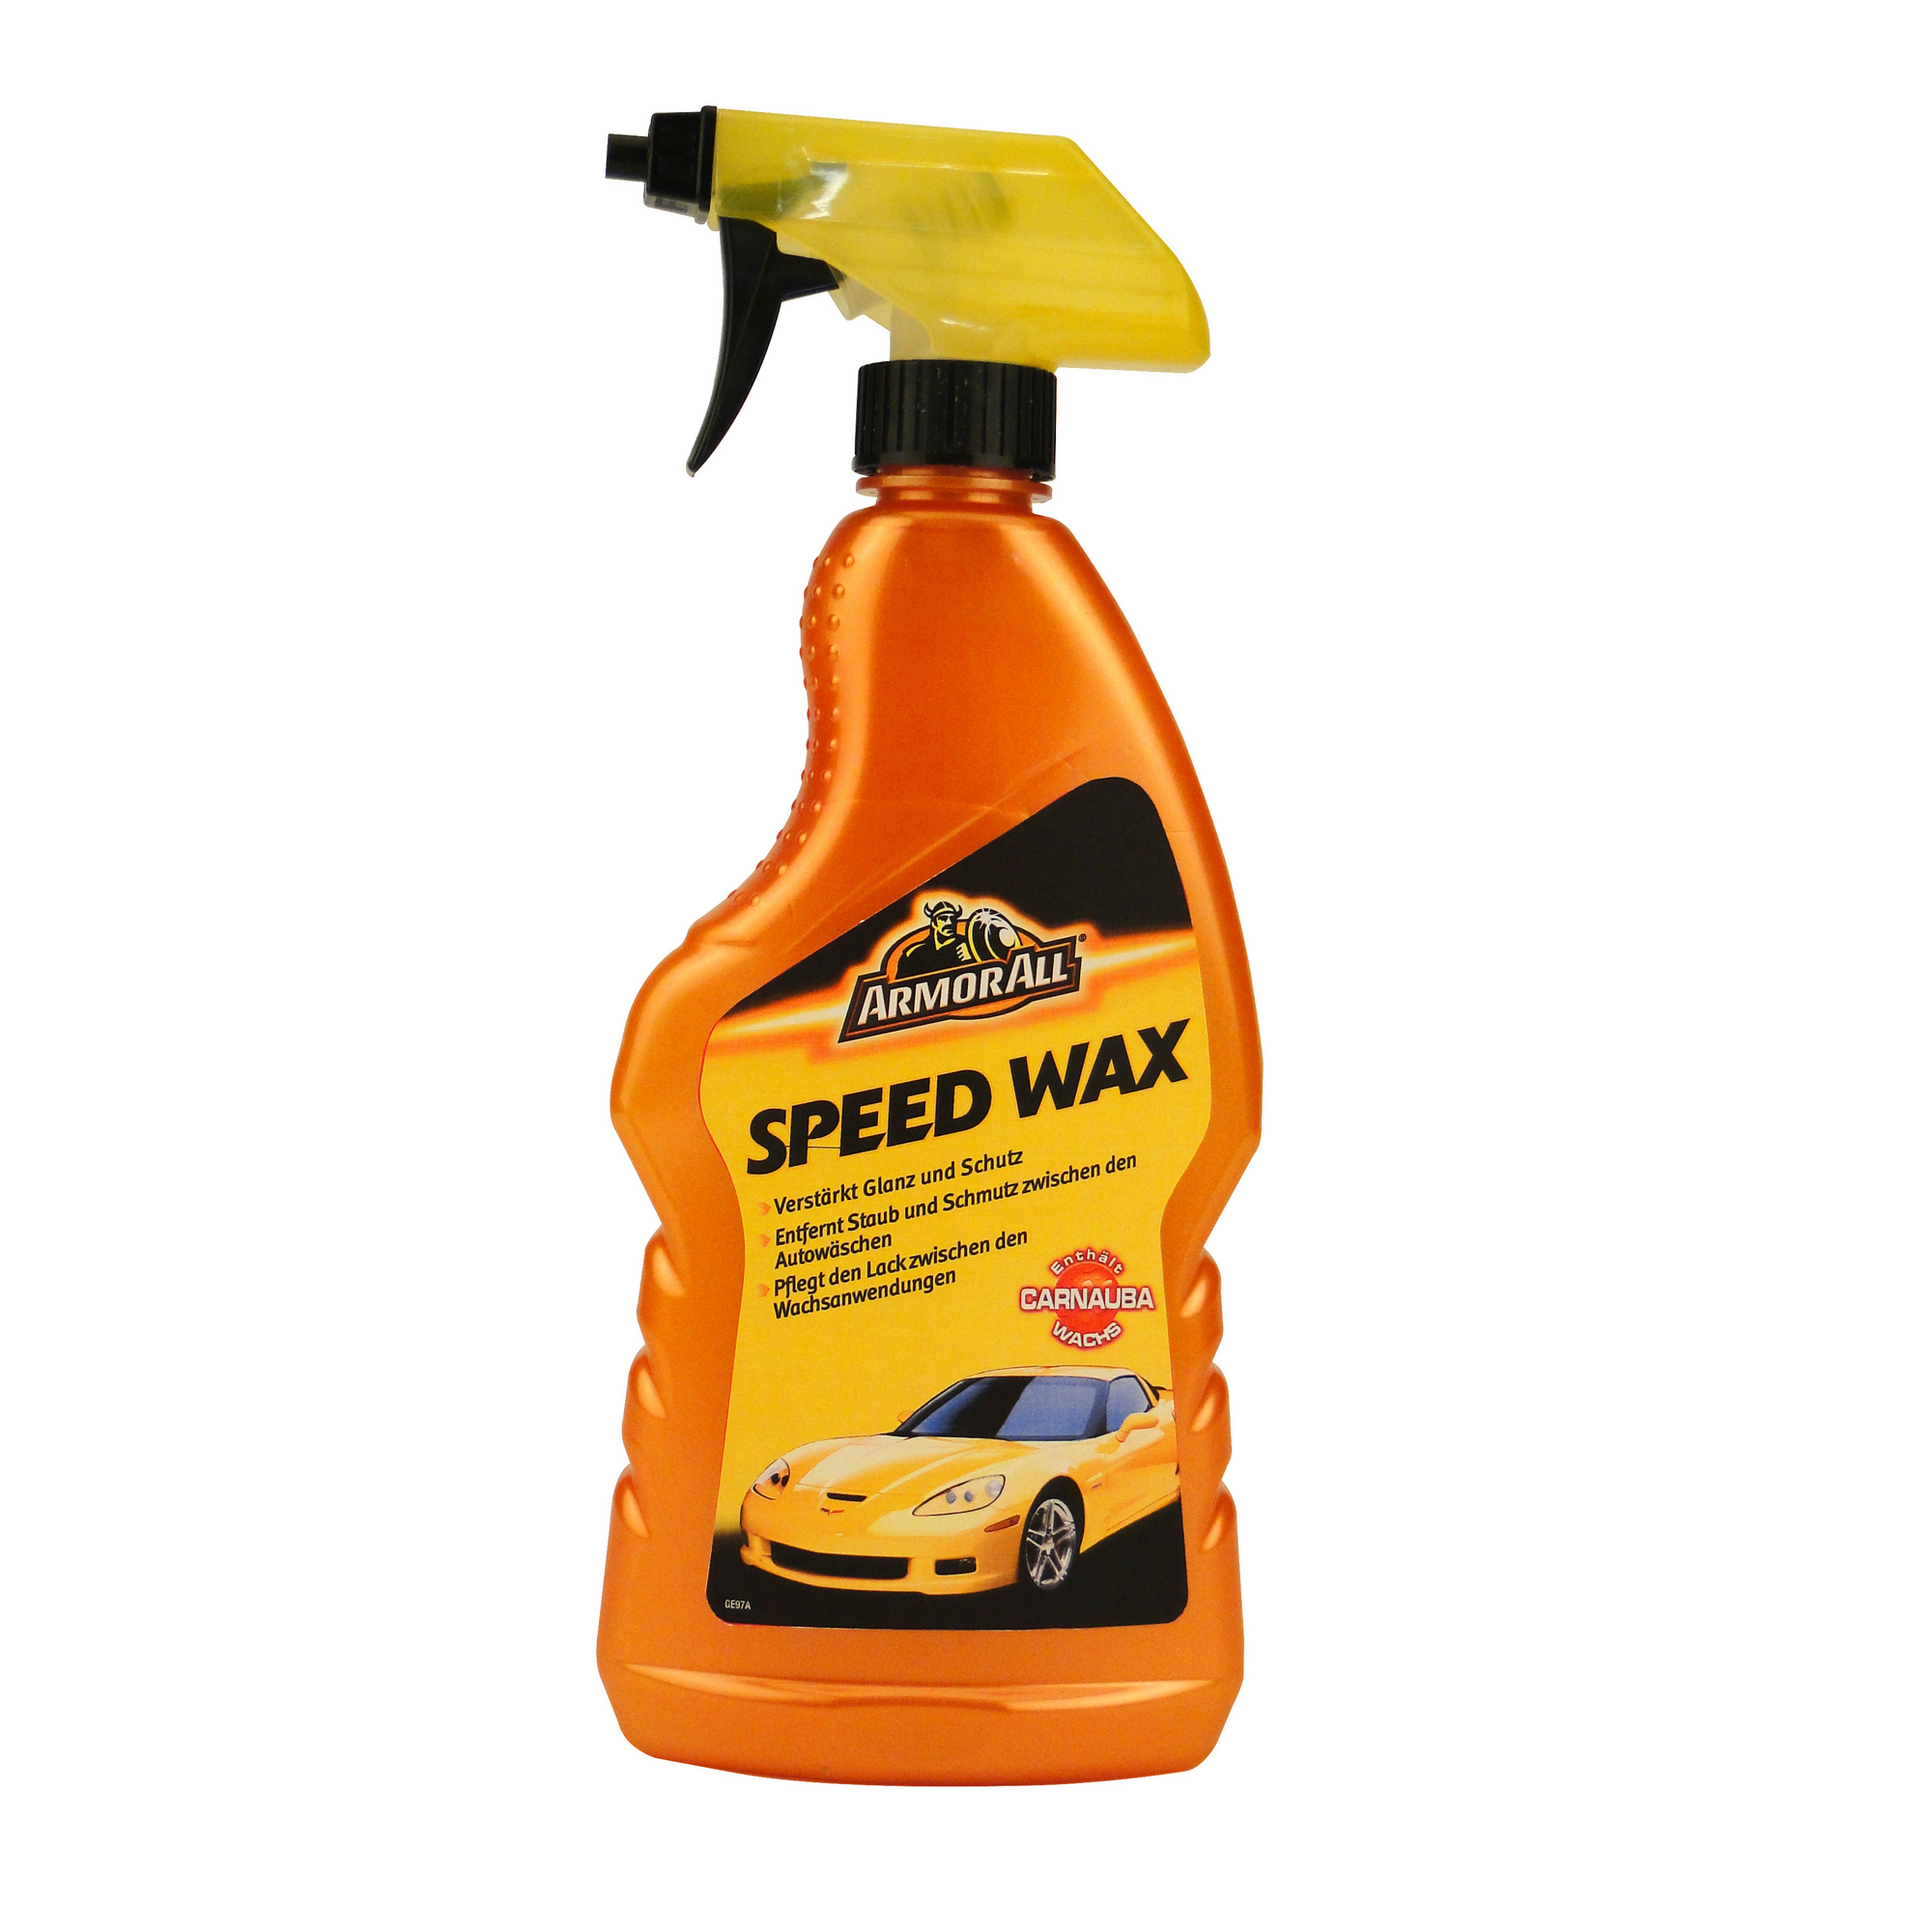 Speed Wax Spray 'Armor all' 500 ml + product picture